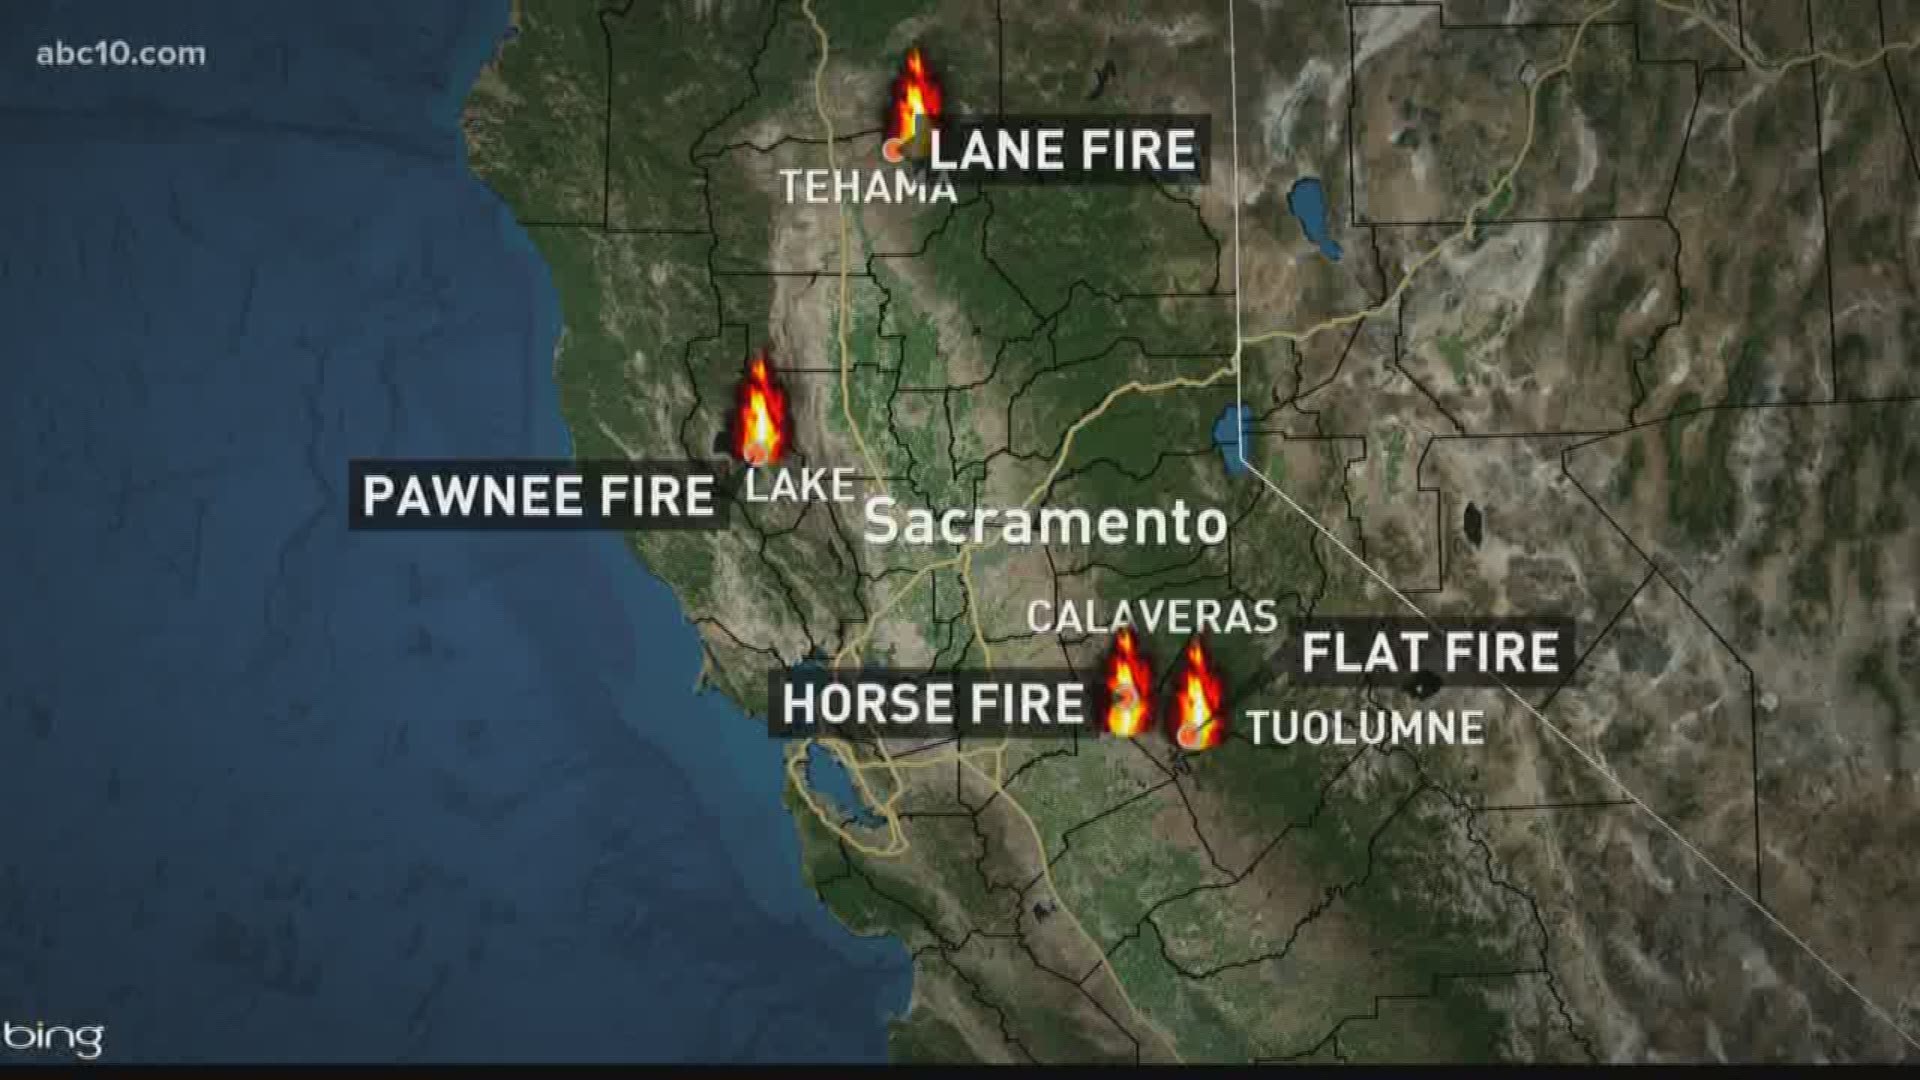 We're on wildfire watch, and there are several burning in Northern California that we're monitoring.